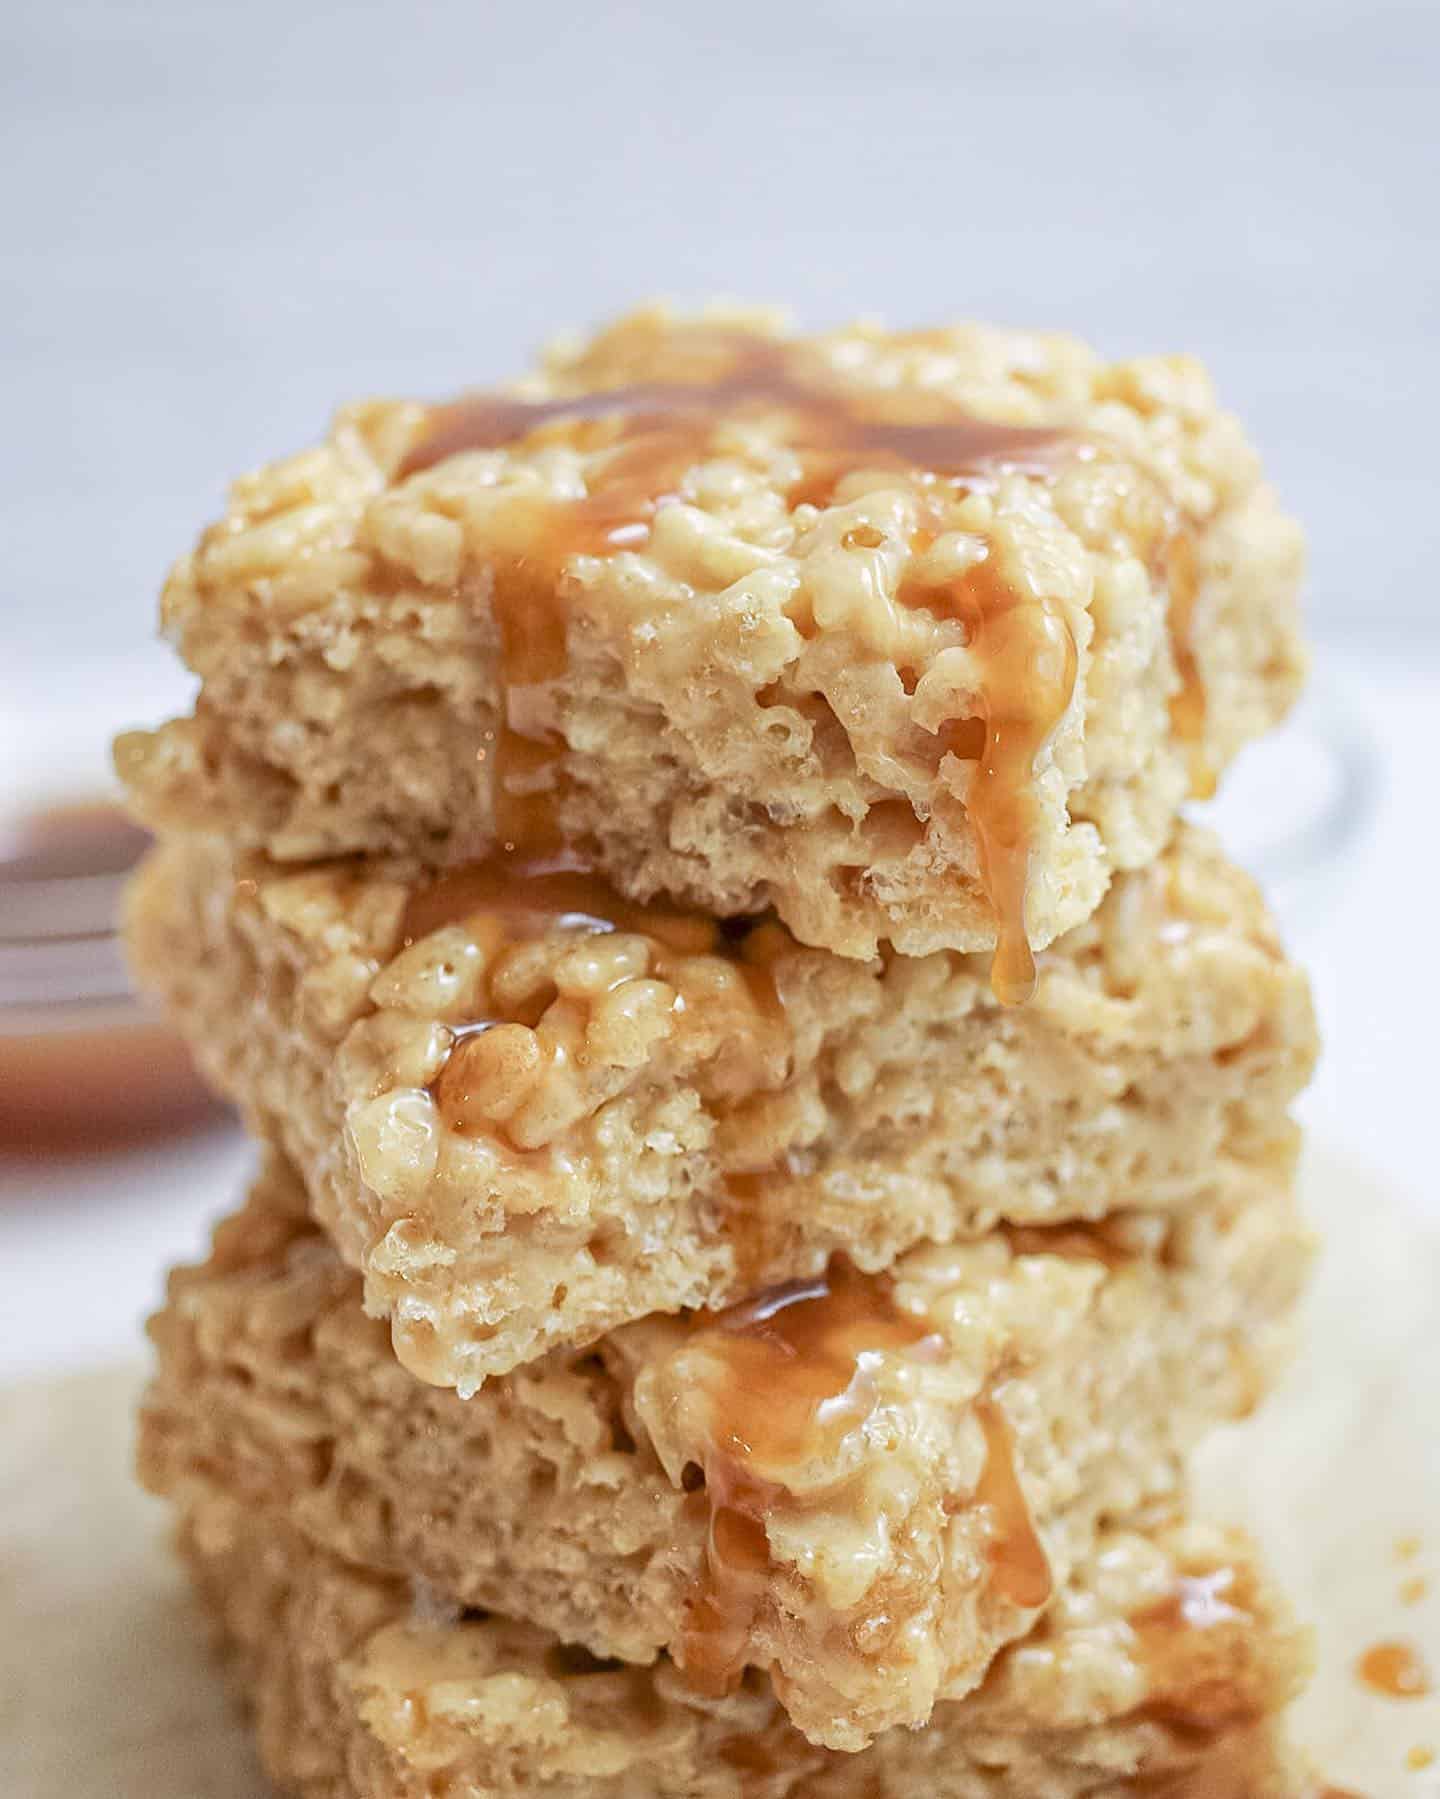 Salted caramel Rice Krispie treats are so delicious and easy to make. I legitimately ate almost the whole pan of these myself. The recipe is on Tasting Table now.

#ricekrispytreats #ricekrispietreats #saltedcaramel #saltedcaramelricekrispietreats #saltedcarameldessert